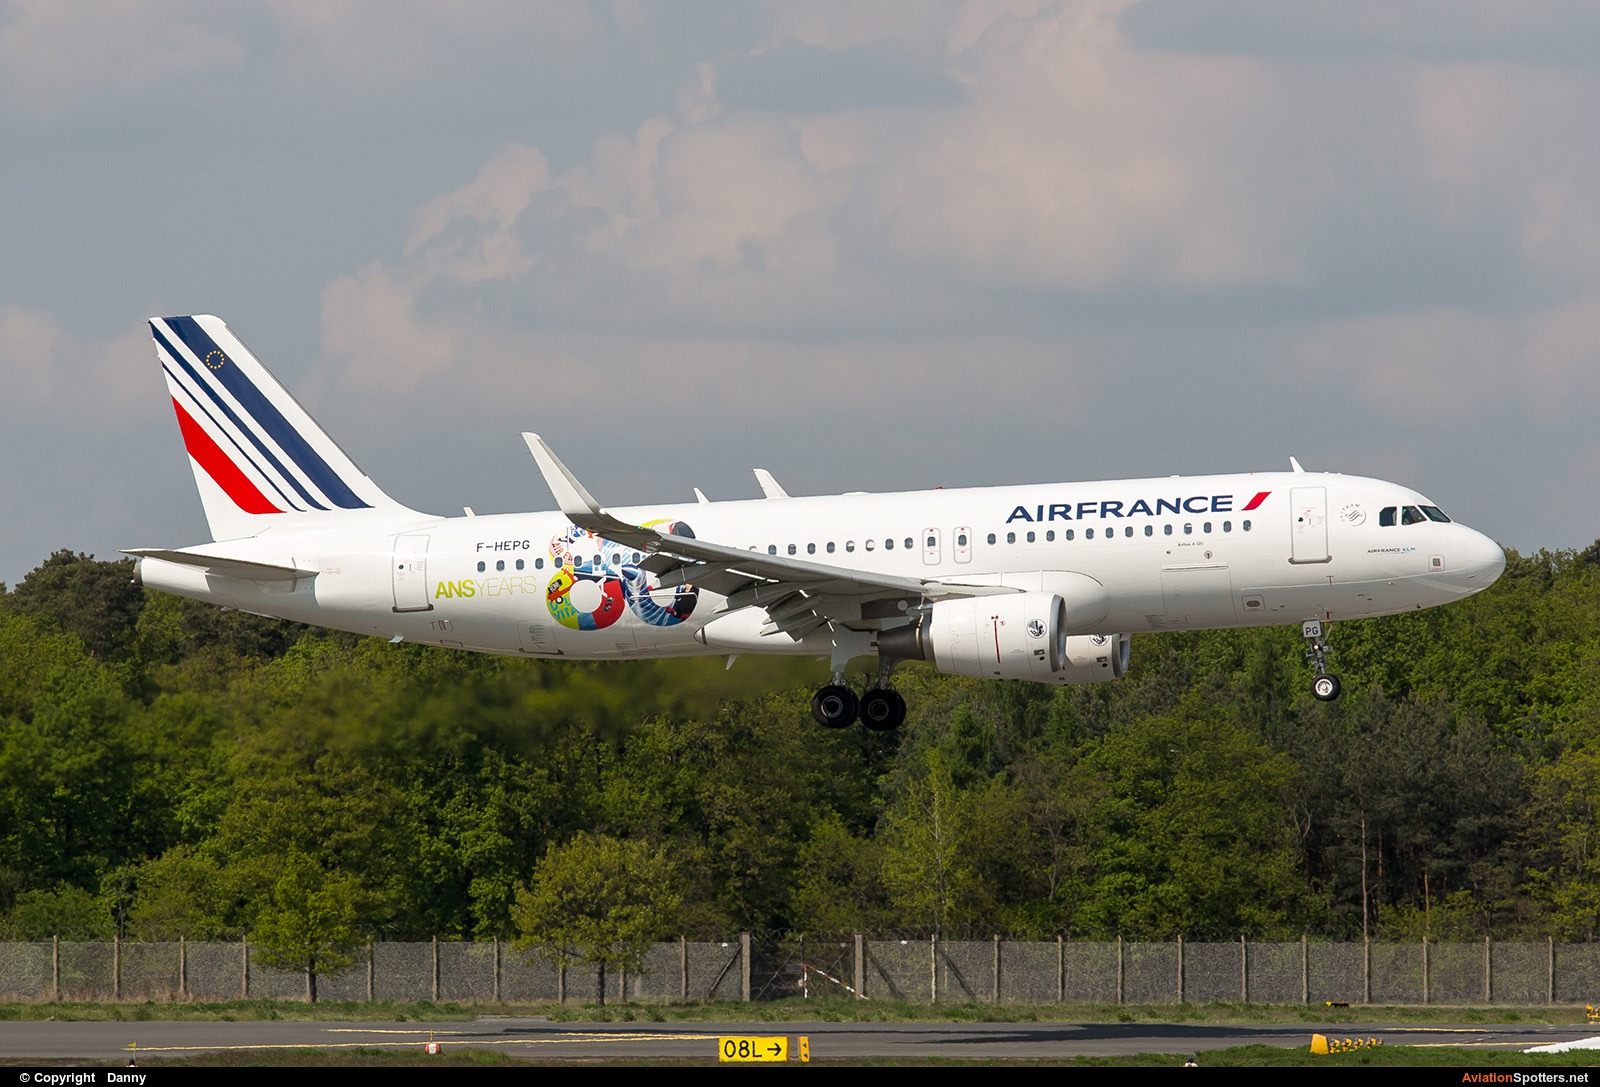 Air France  -  A320-214  (F-HEPG) By Danny (Digdis)